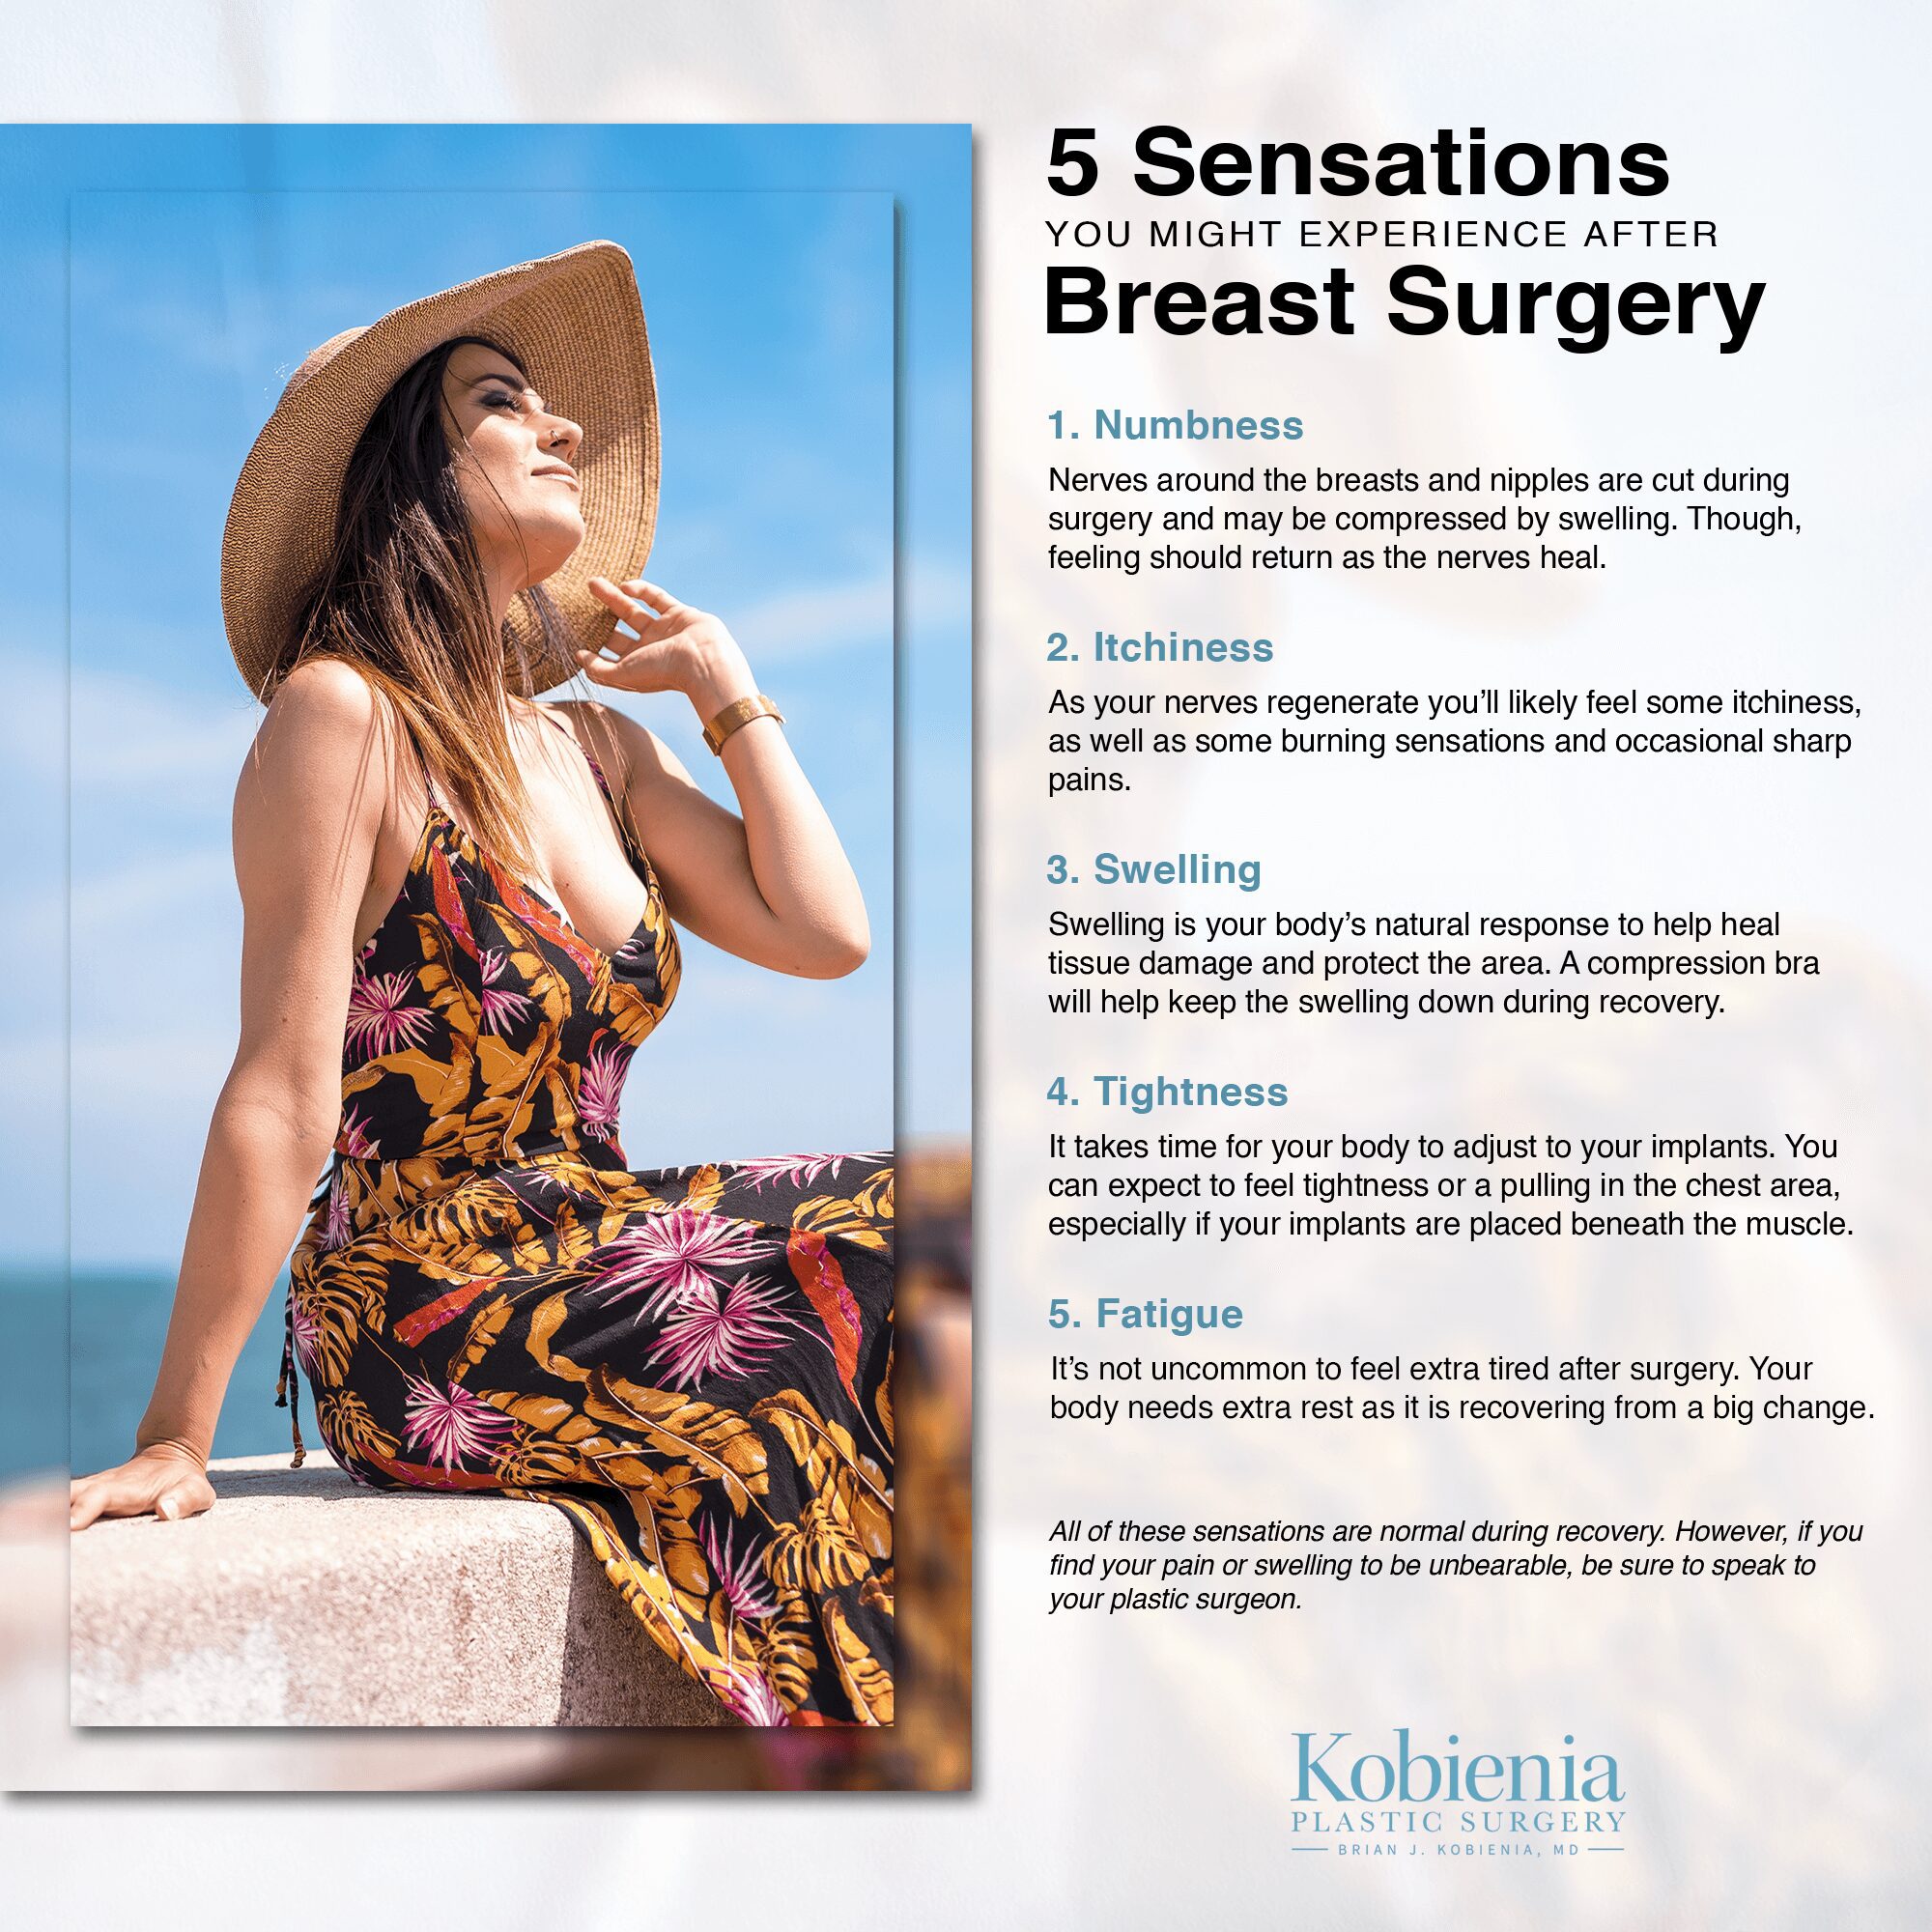 5 Sensations You Might Experience After Breast Surgery